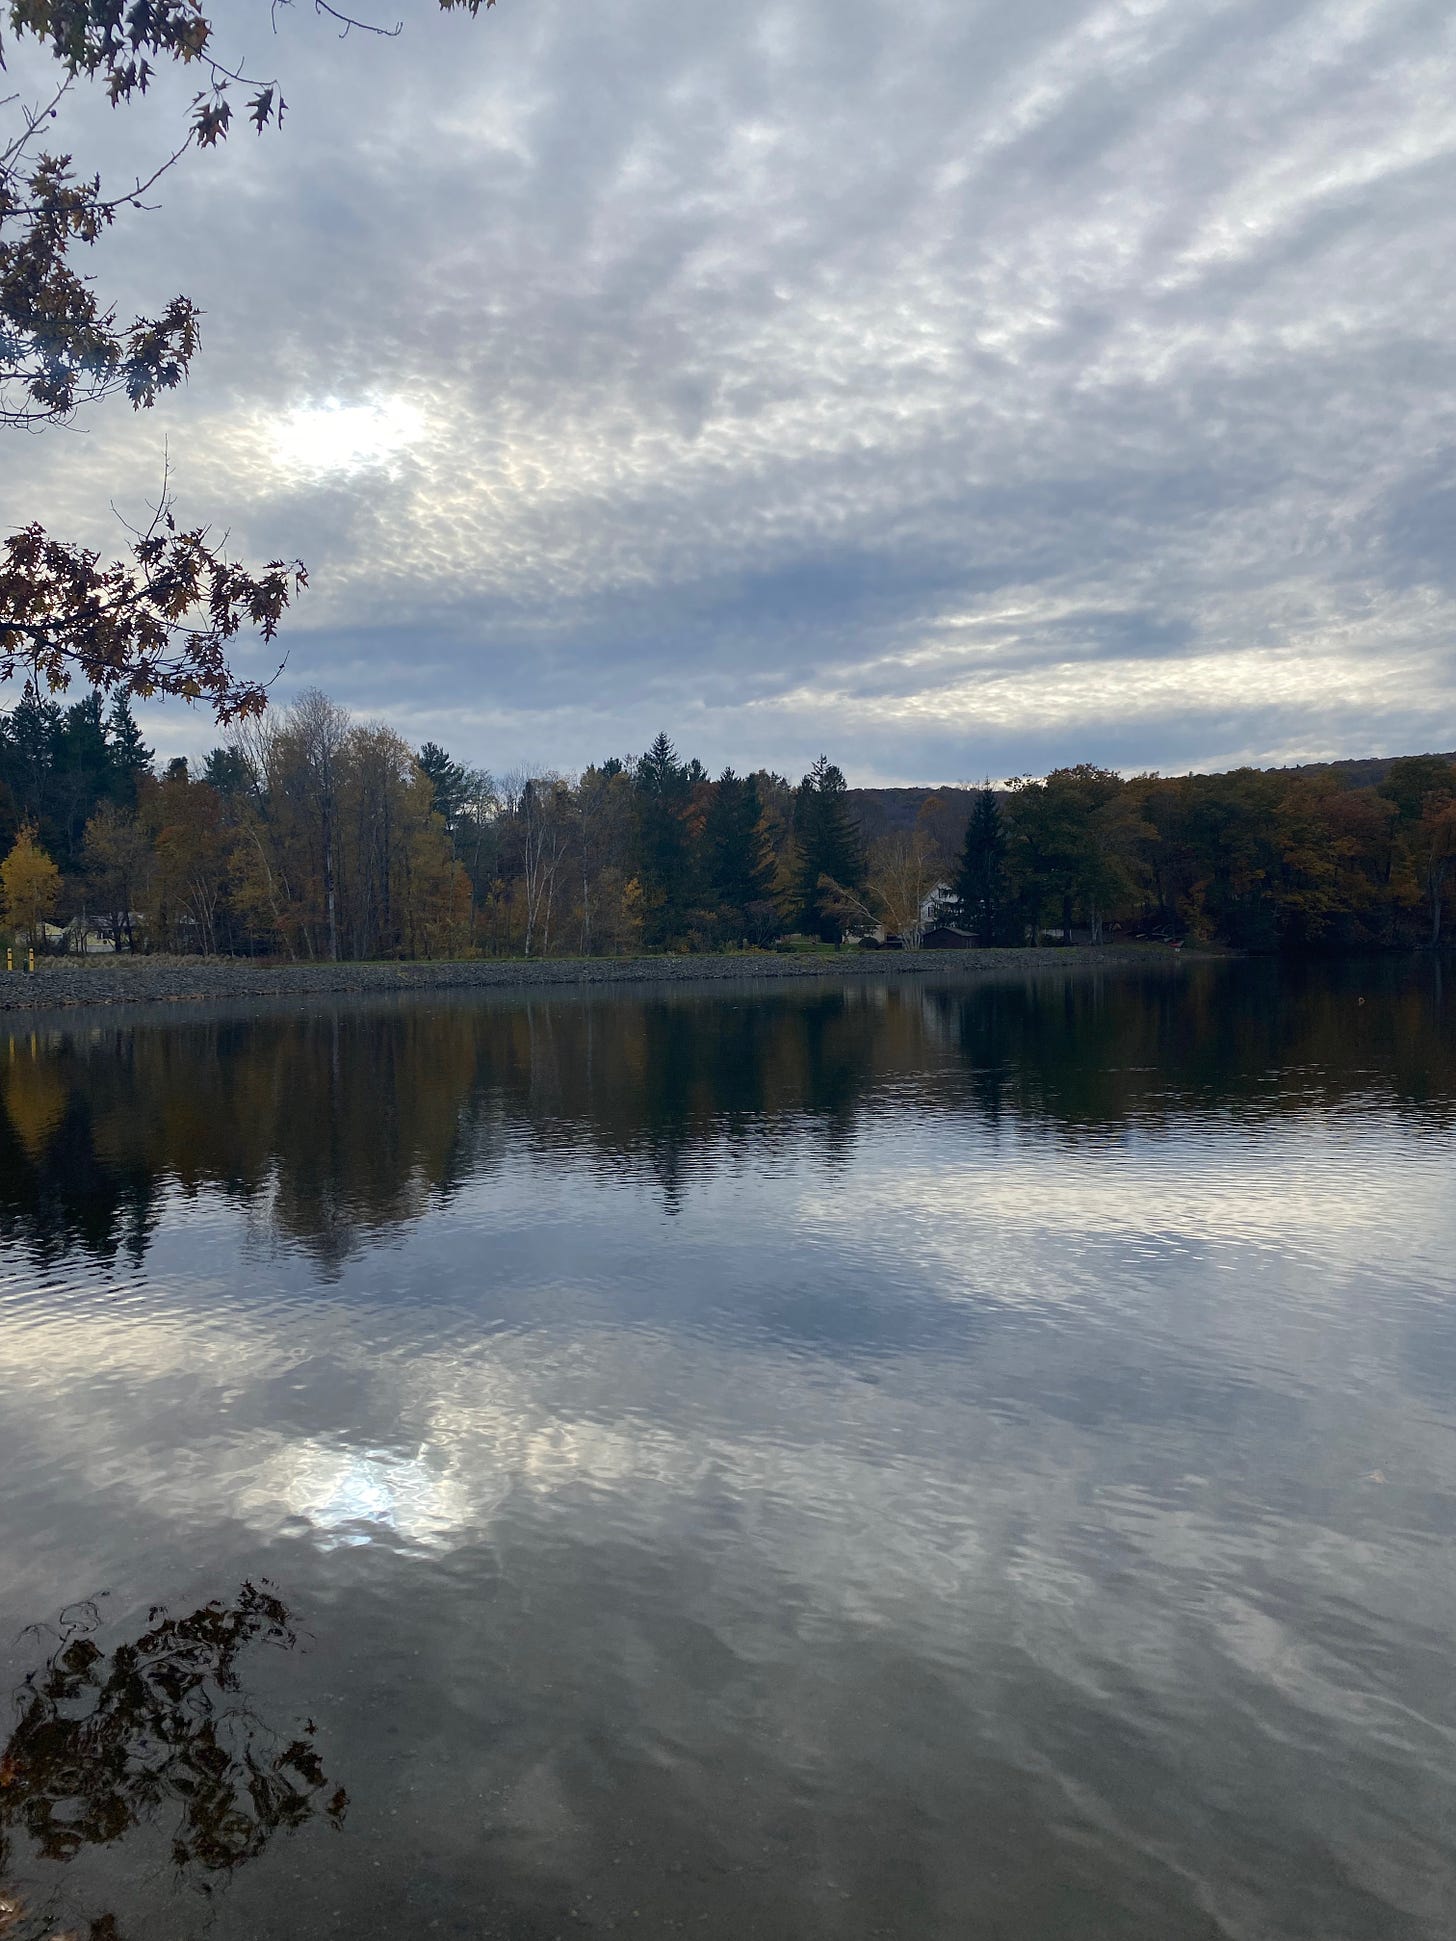 Ashfield Lake under a grey sky streaked with sunlight. Clouds, the sun, and gold and brown trees are reflected on the water’s surface.